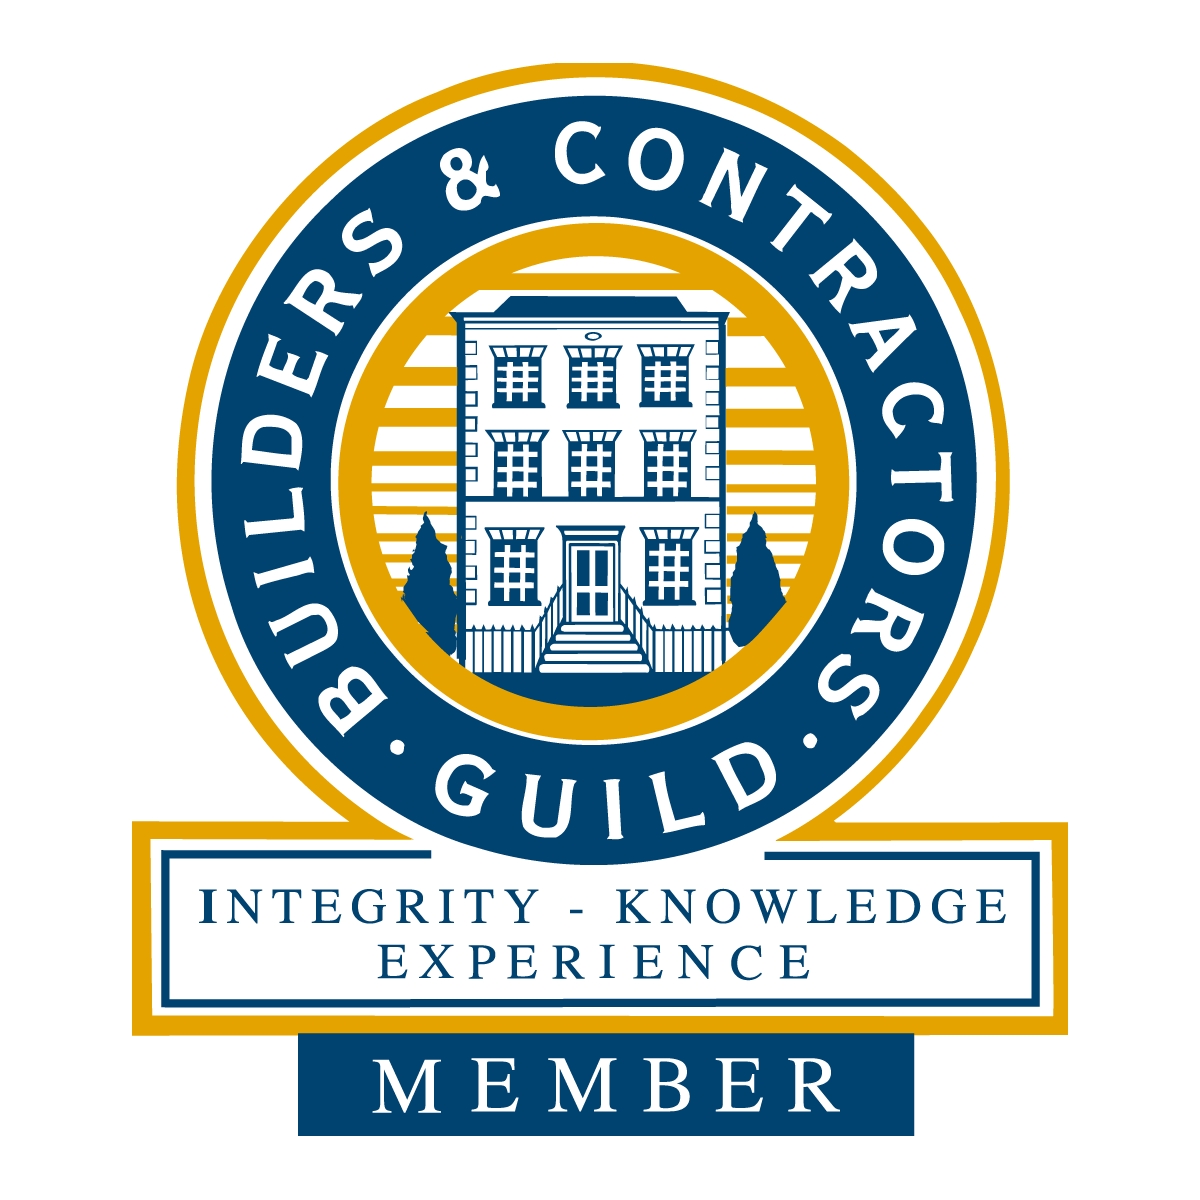 The Guild Of Builders and Contractors Ltd